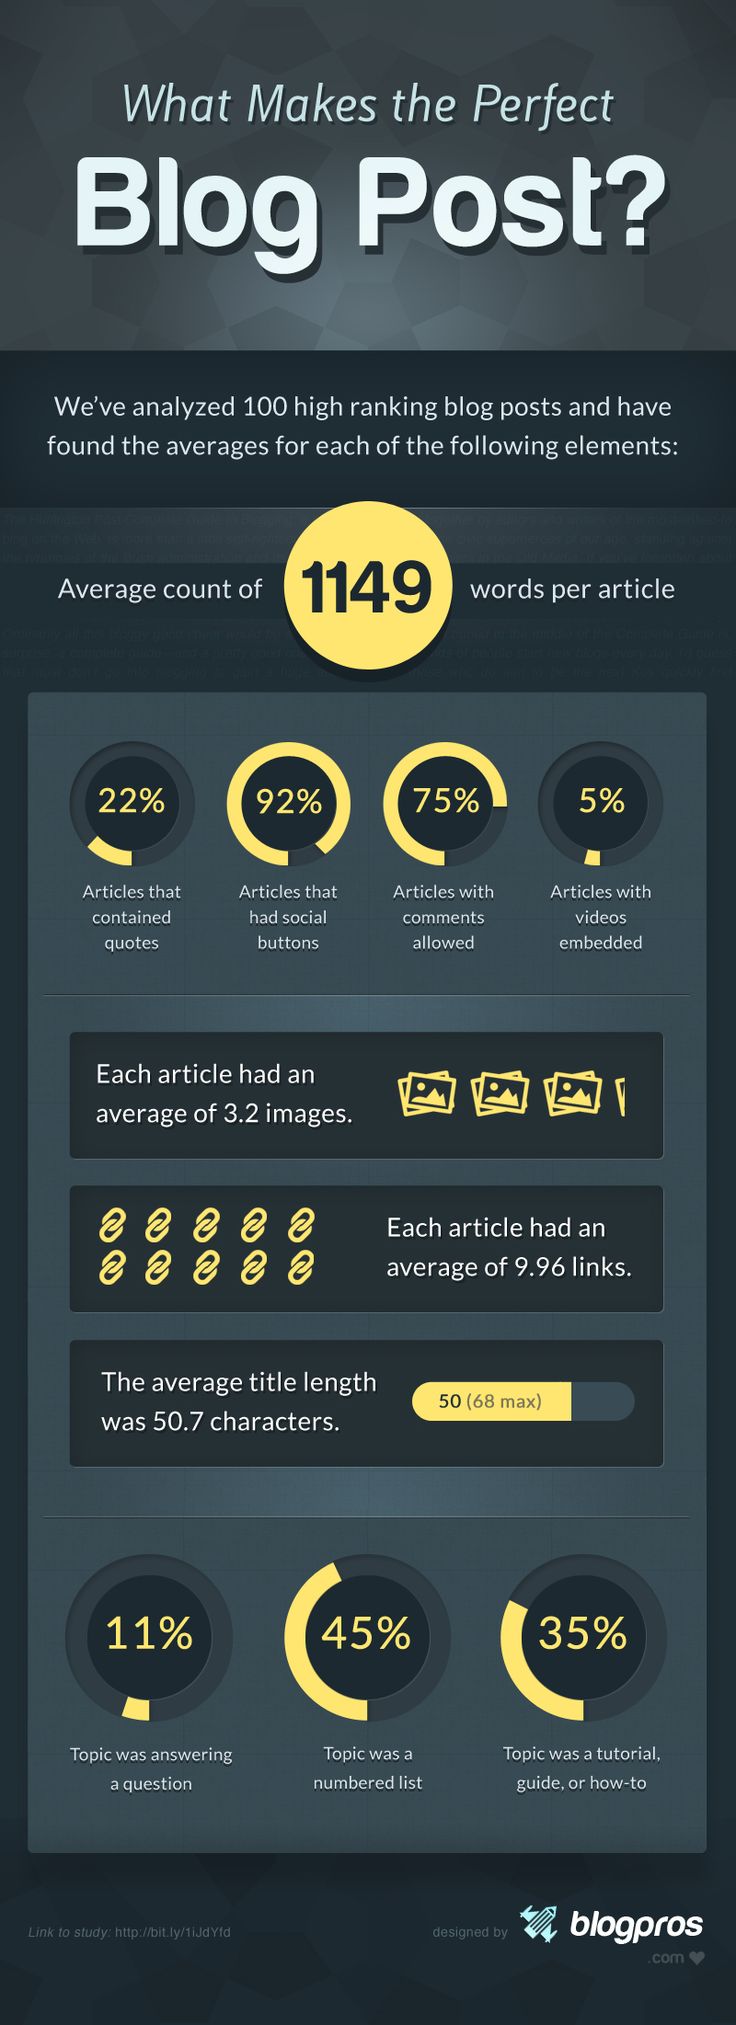 this infographic breaks down the perfect blog post